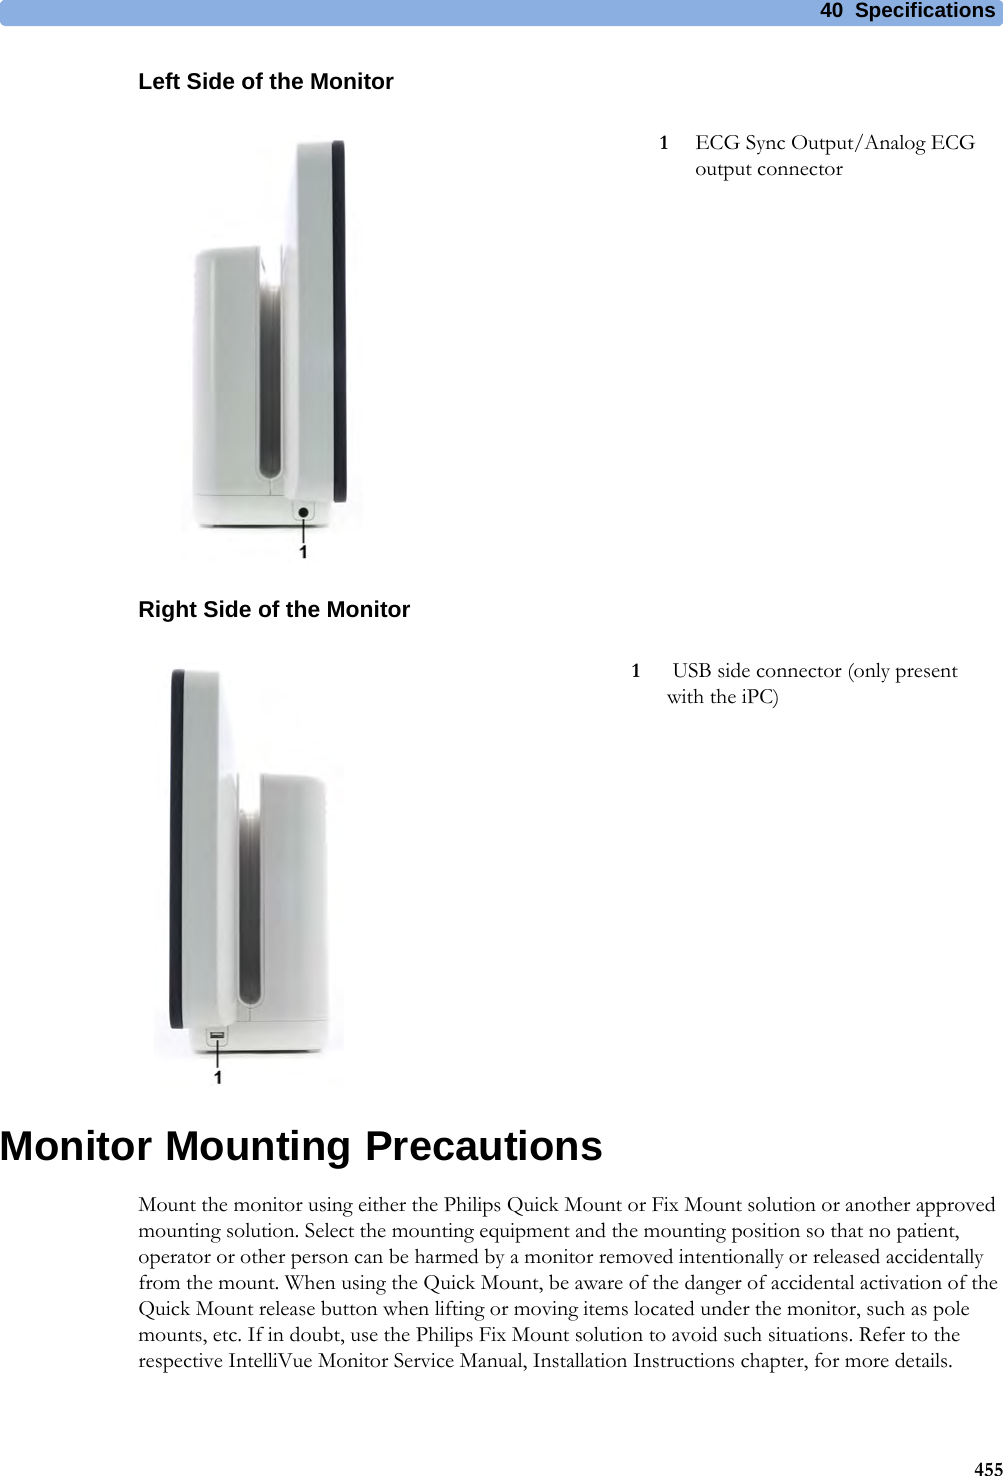 40 Specifications455Left Side of the MonitorRight Side of the MonitorMonitor Mounting PrecautionsMount the monitor using either the Philips Quick Mount or Fix Mount solution or another approved mounting solution. Select the mounting equipment and the mounting position so that no patient, operator or other person can be harmed by a monitor removed intentionally or released accidentally from the mount. When using the Quick Mount, be aware of the danger of accidental activation of the Quick Mount release button when lifting or moving items located under the monitor, such as pole mounts, etc. If in doubt, use the Philips Fix Mount solution to avoid such situations. Refer to the respective IntelliVue Monitor Service Manual, Installation Instructions chapter, for more details.1ECG Sync Output/Analog ECG output connector1 USB side connector (only present with the iPC)